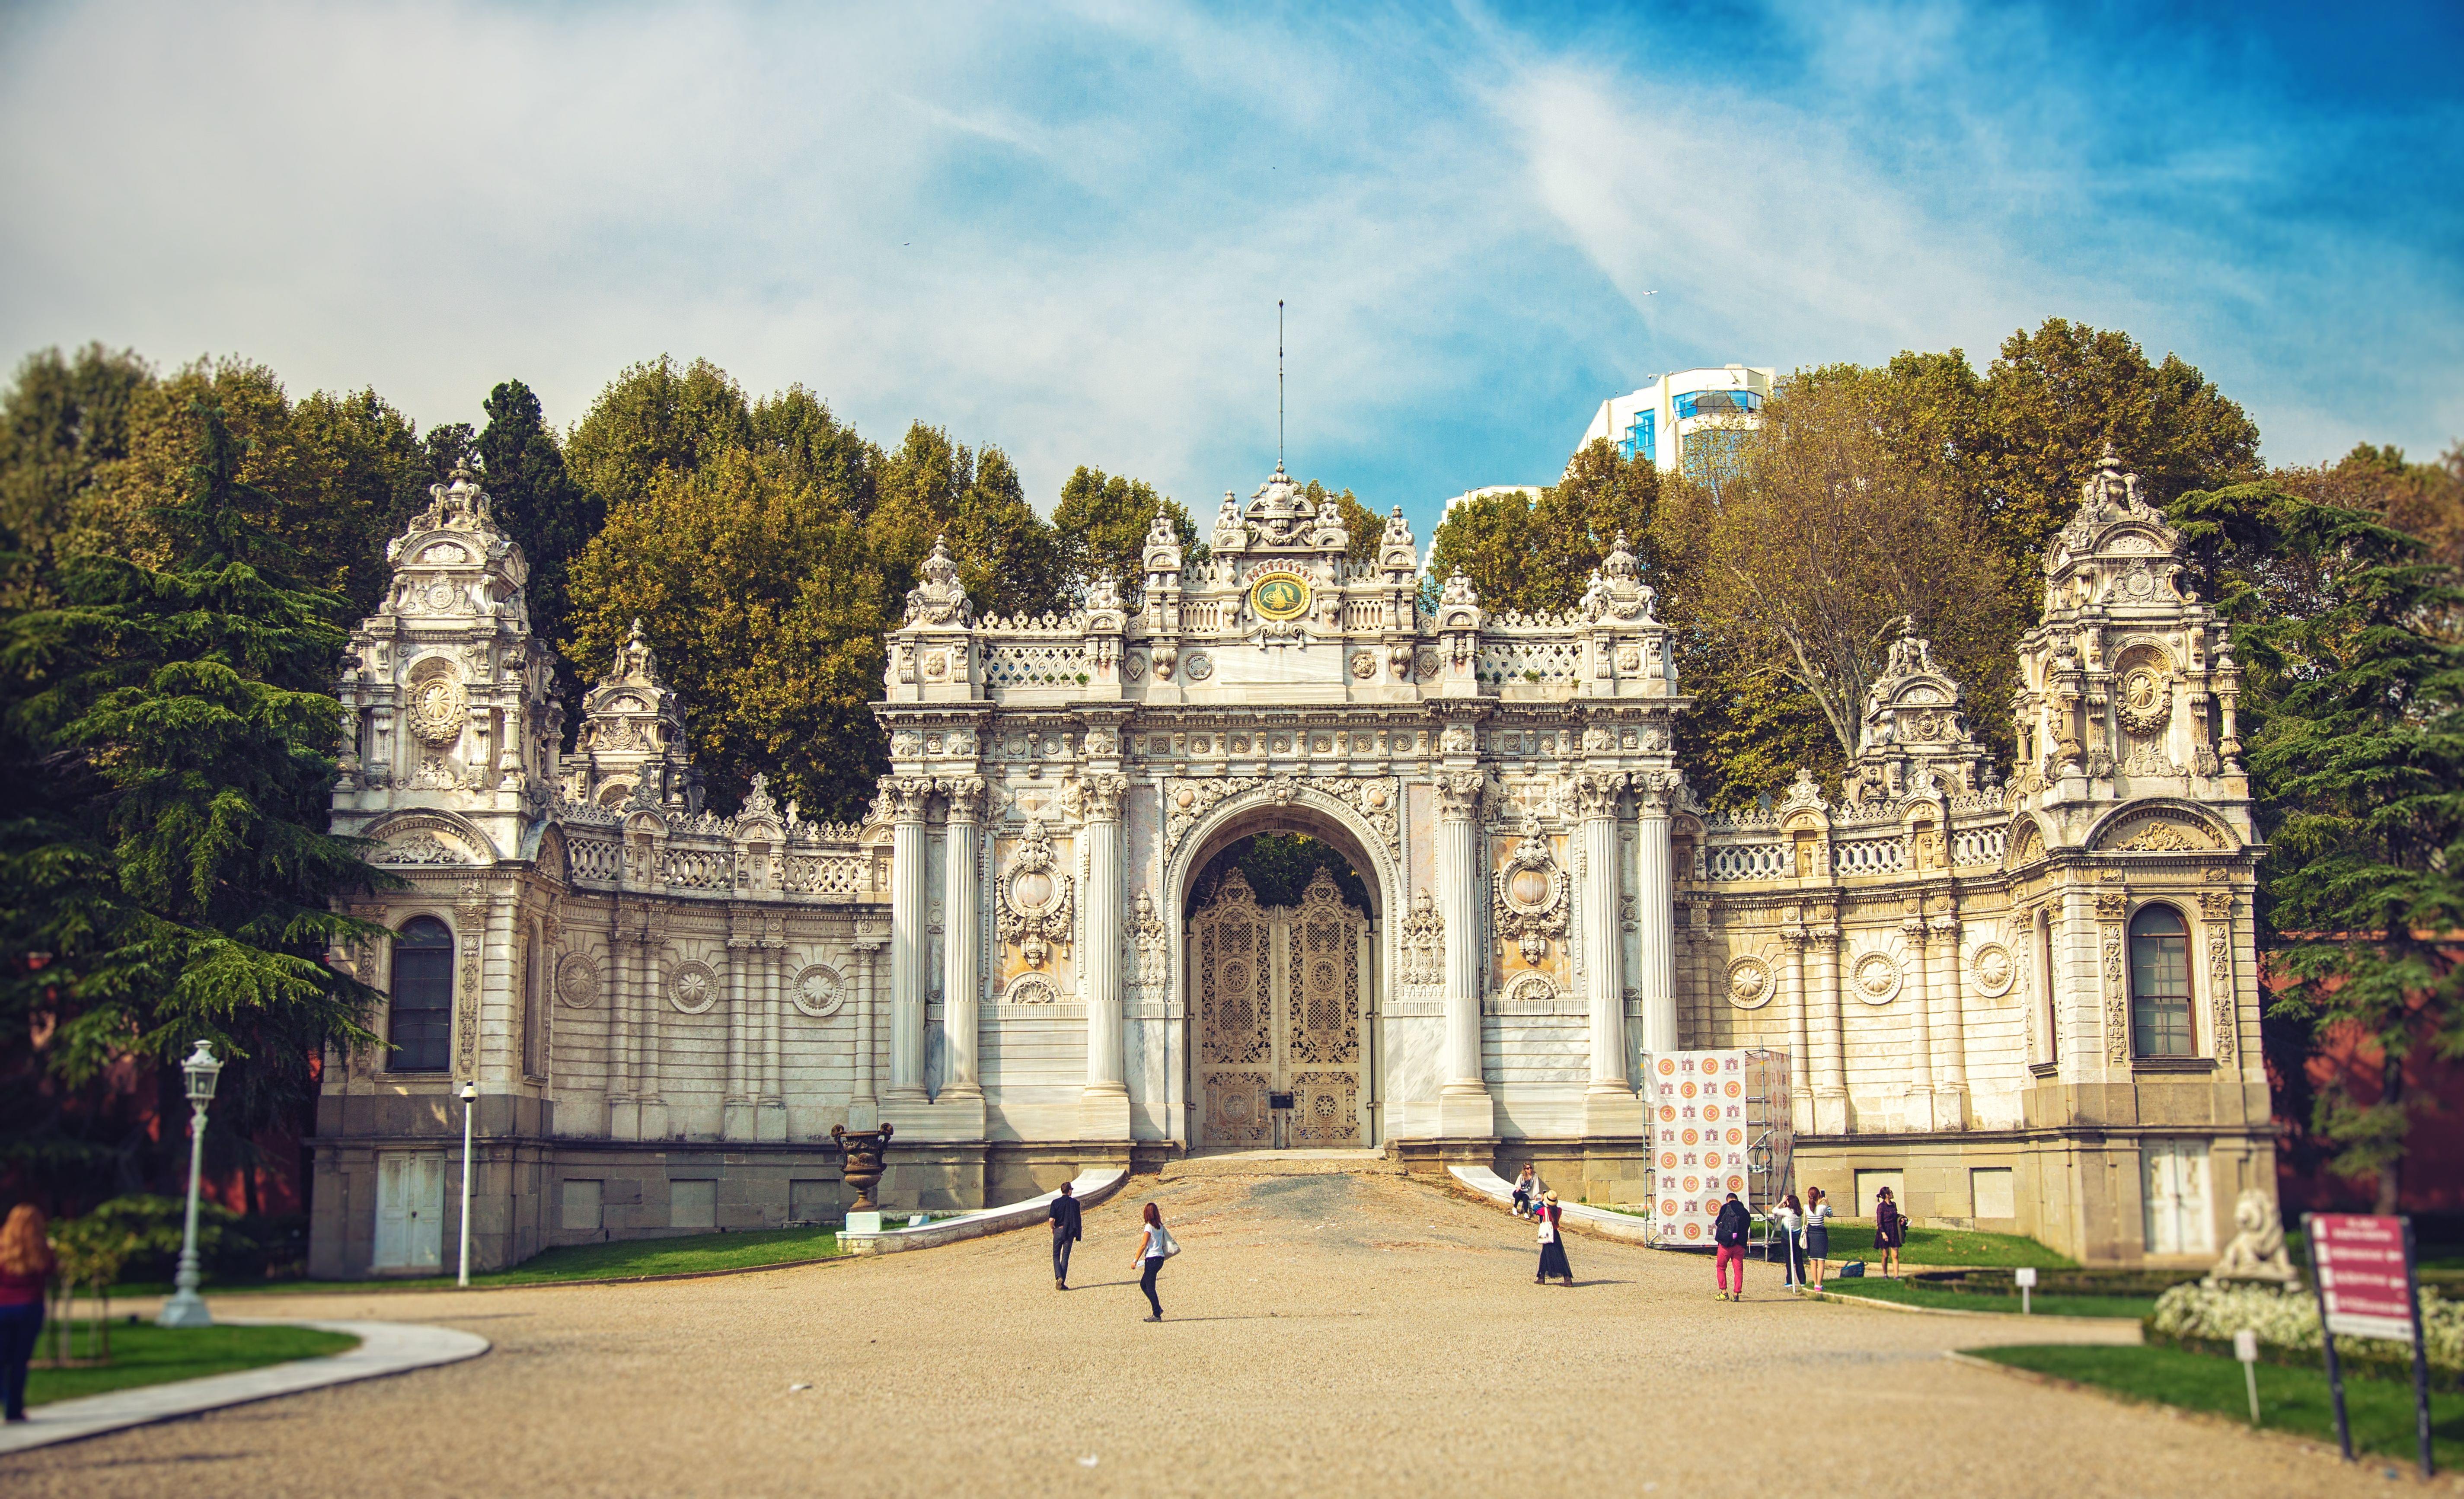 Gate of Sultan, Dolmabahce Palace